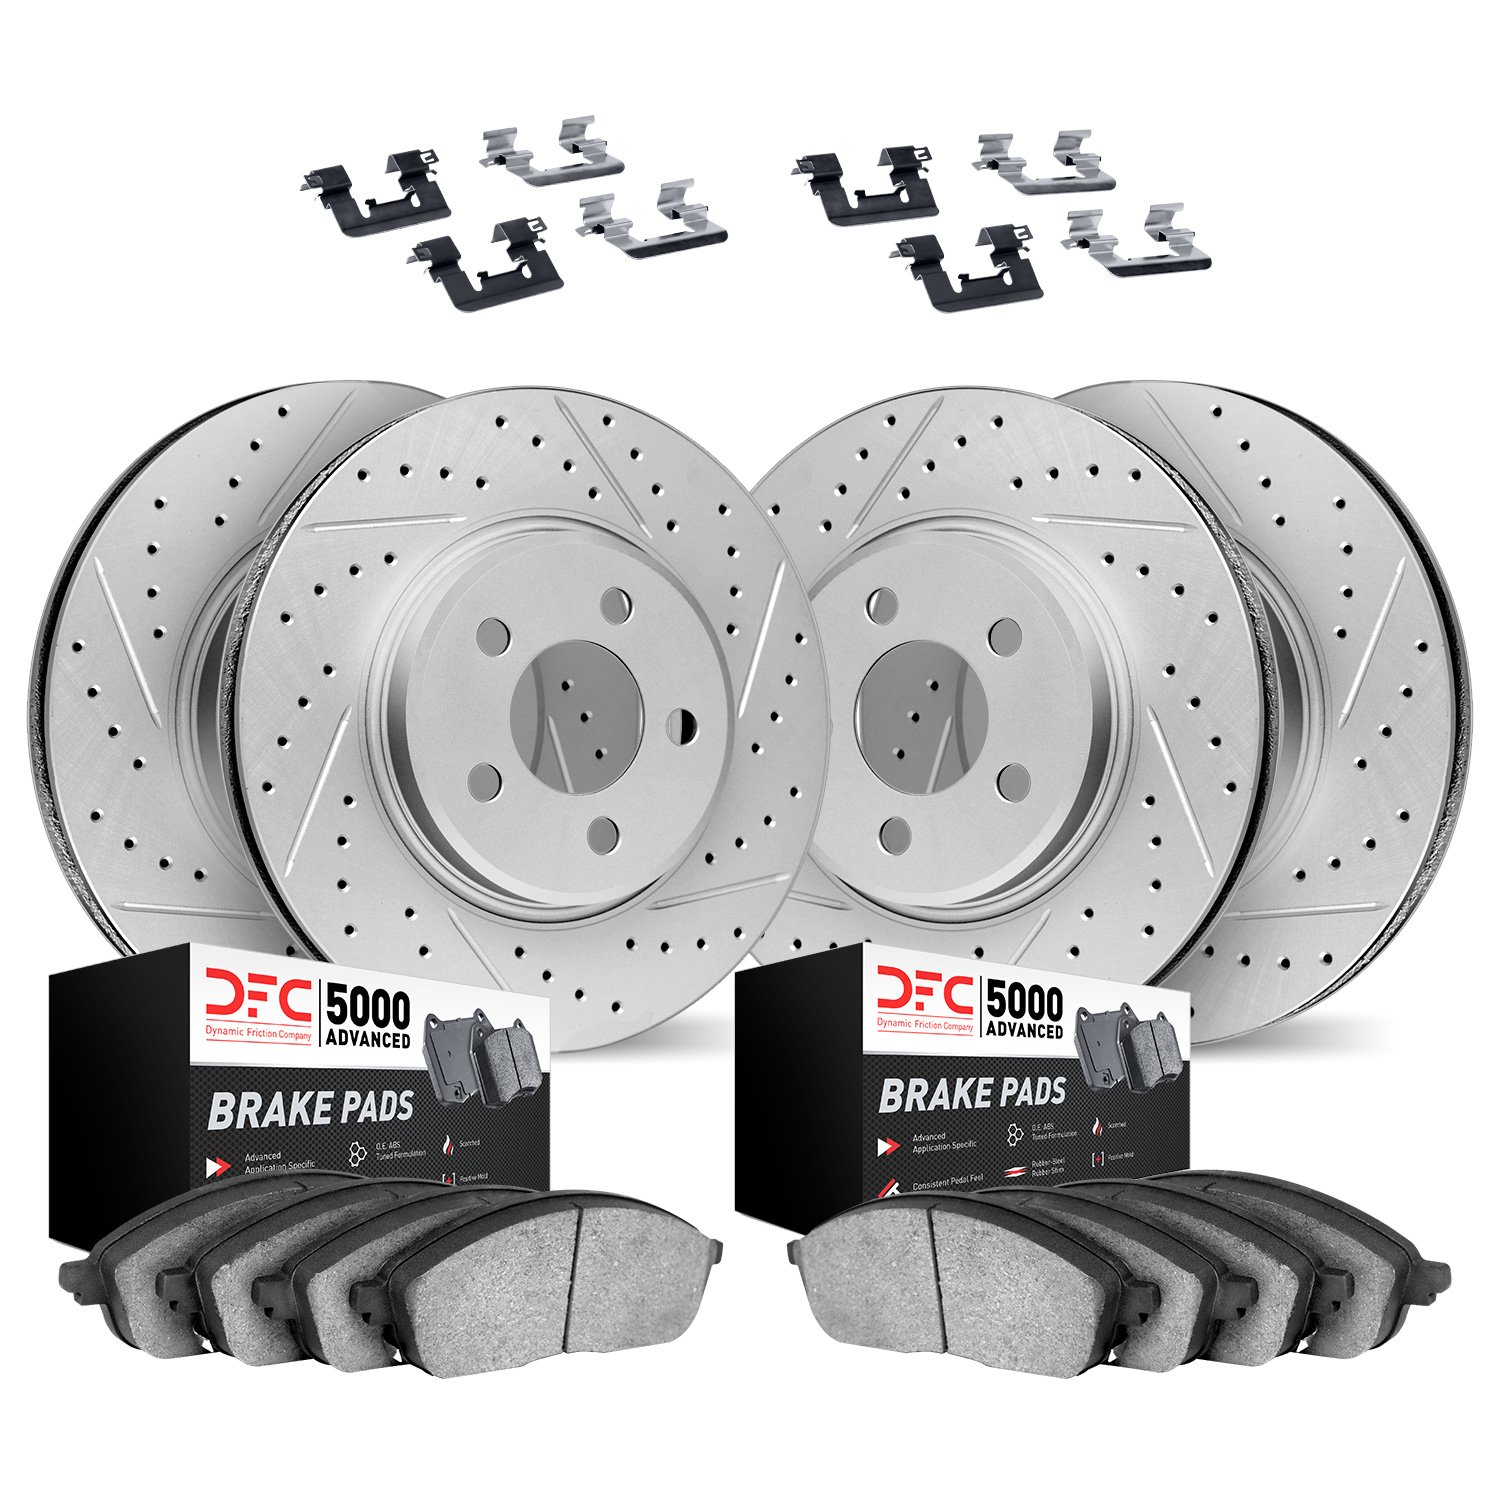 2514-31044 Geoperformance Drilled/Slotted Rotors w/5000 Advanced Brake Pads Kit & Hardware, 2010-2011 BMW, Position: Front and R